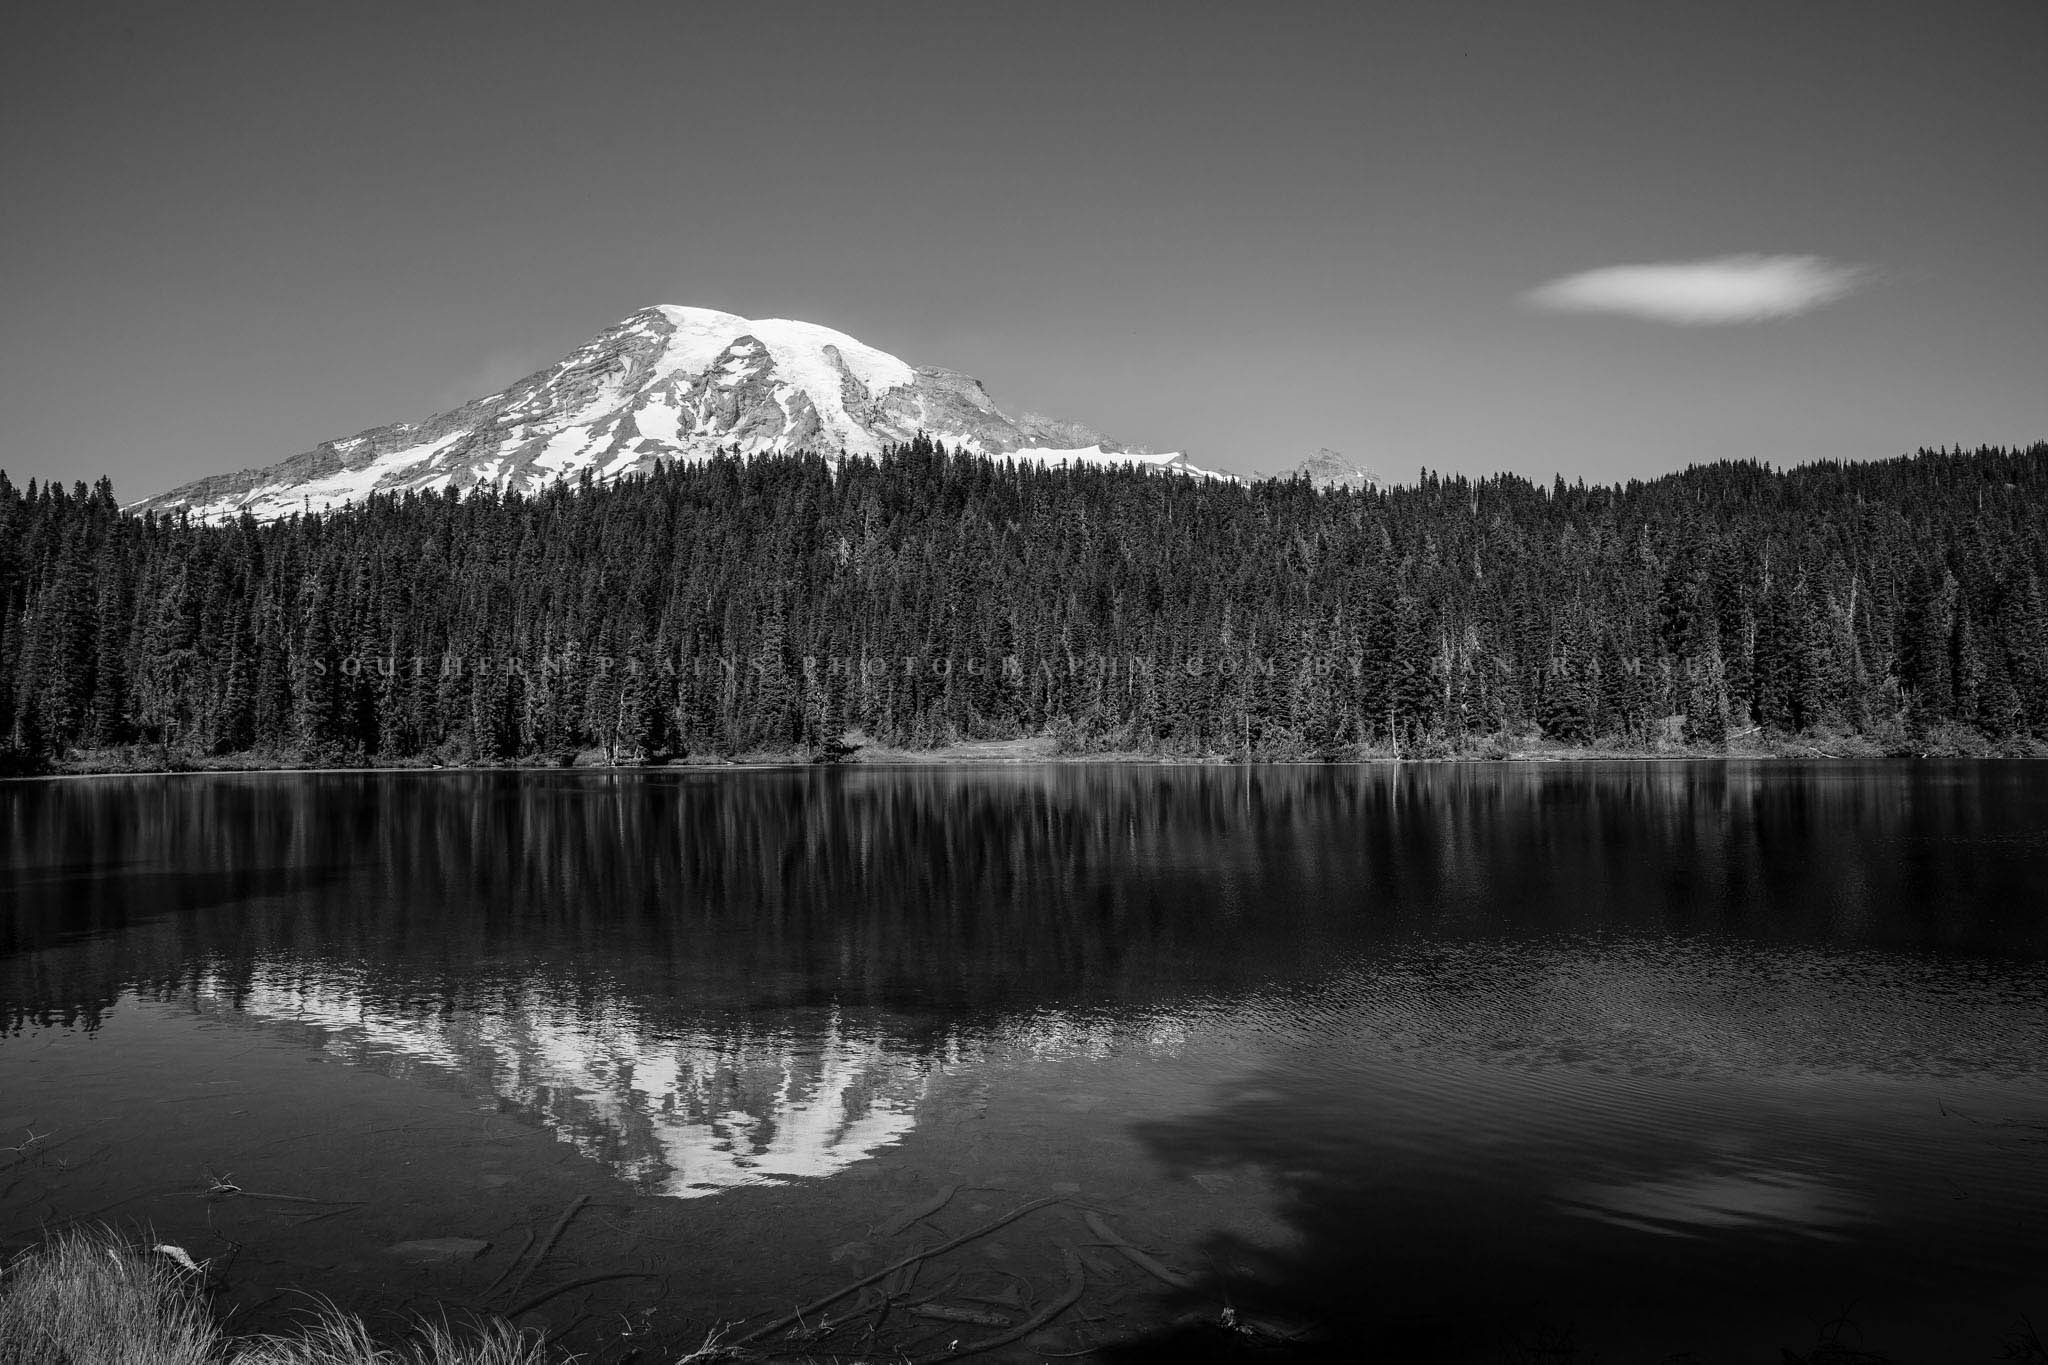 Black and white Pacific Northwest landscape photography print of Mount Rainier overlooking Reflection Lake at a late summer day in Washington state by Sean Ramsey of Southern Plains Photography.